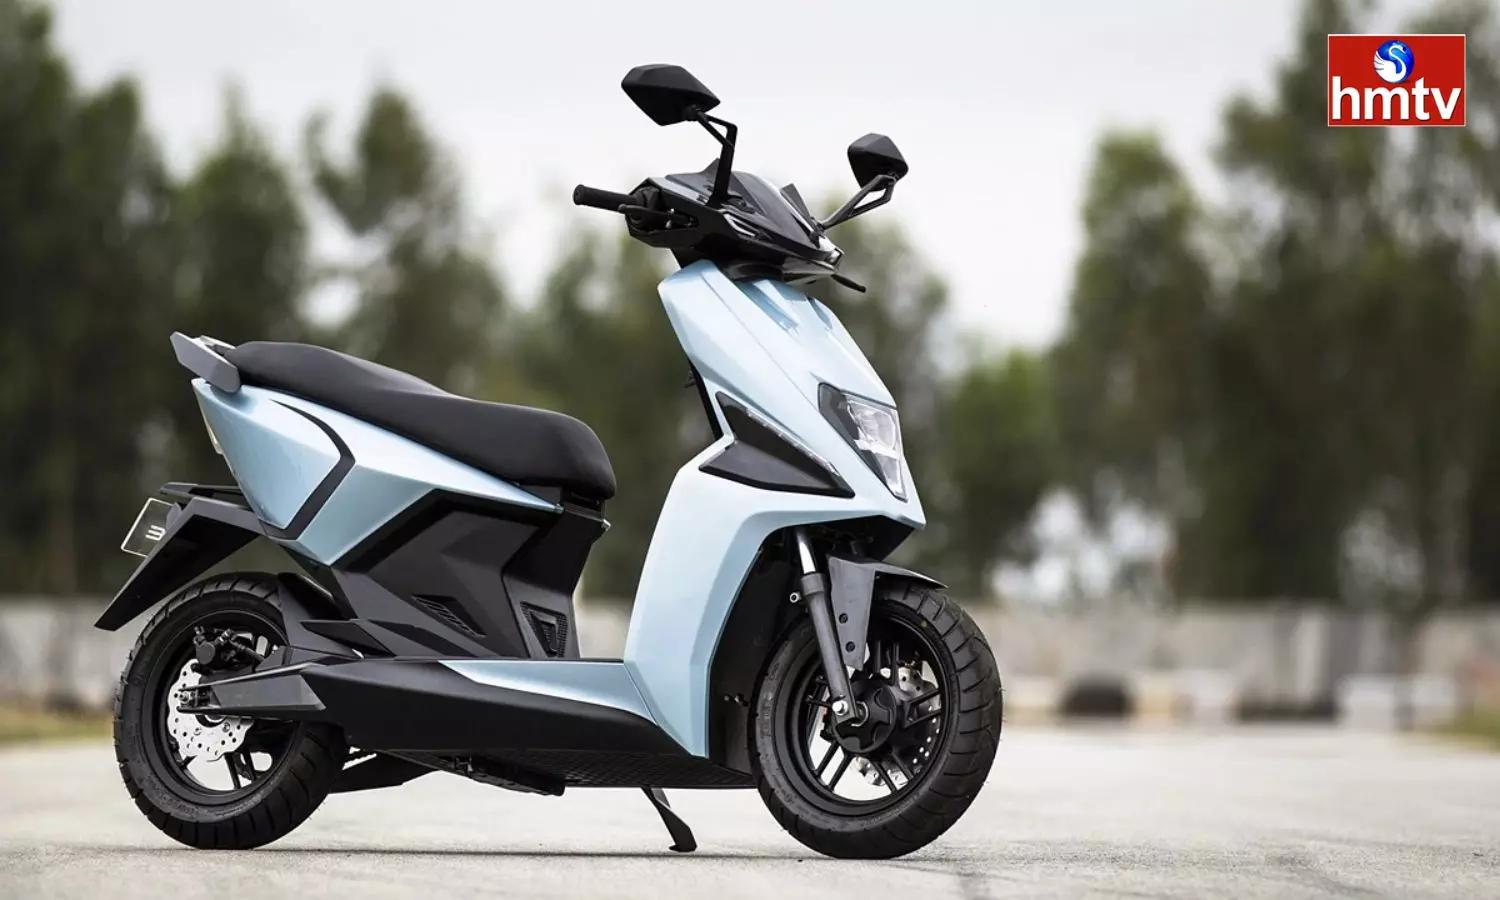 Simple Energy Planning to Launch its Second EV Scooter after the Simple One EV Scooter